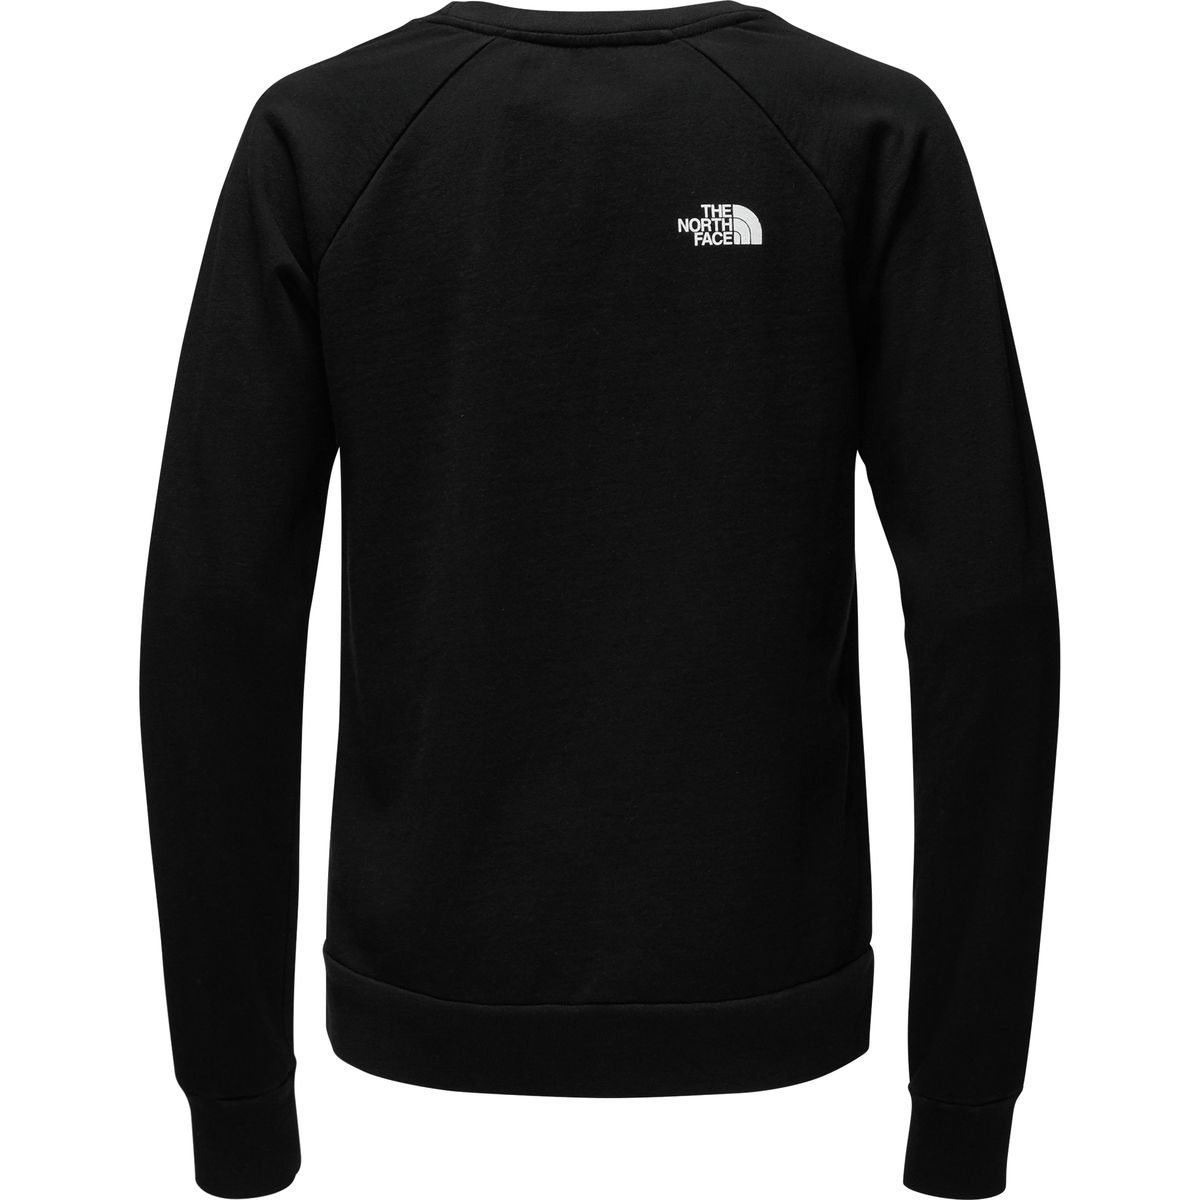 The North Face Cali Roots Crew Neck Pullover Sweatshirt - Women's